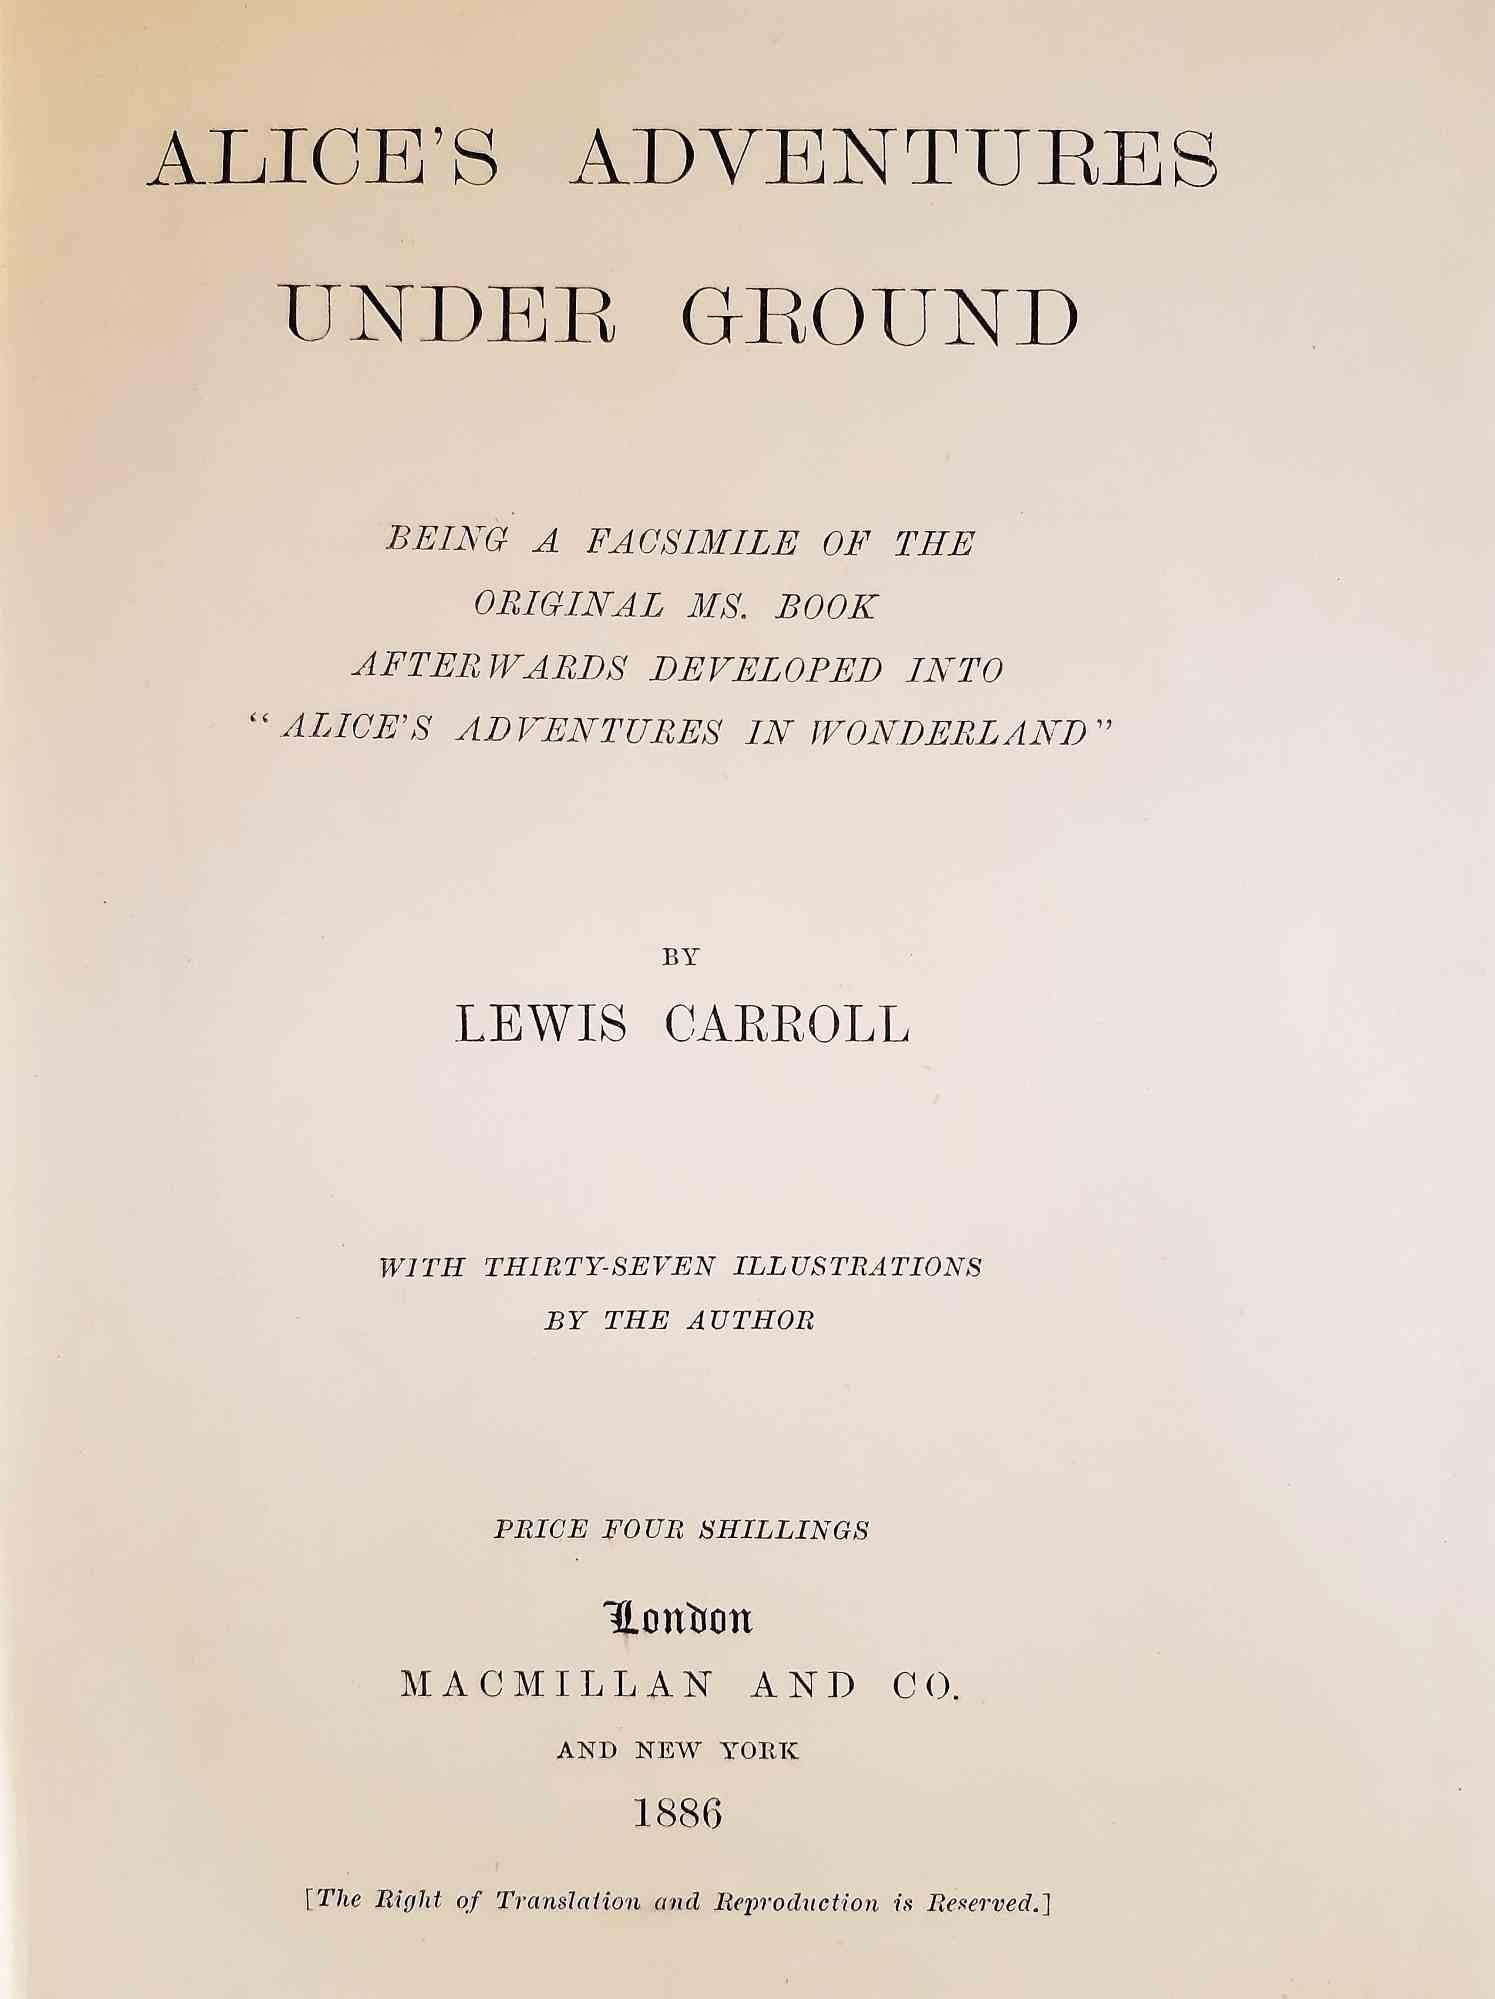 Alice’s Adventures Underground is an original modern rare book written by Lewis Carroll (Daresbury, 1832 - Guiford, 1898) in 1886.

Original First Edition. Original Cloth. Format: in 8°. Published by McMillan, London.

The book includes 97 pages